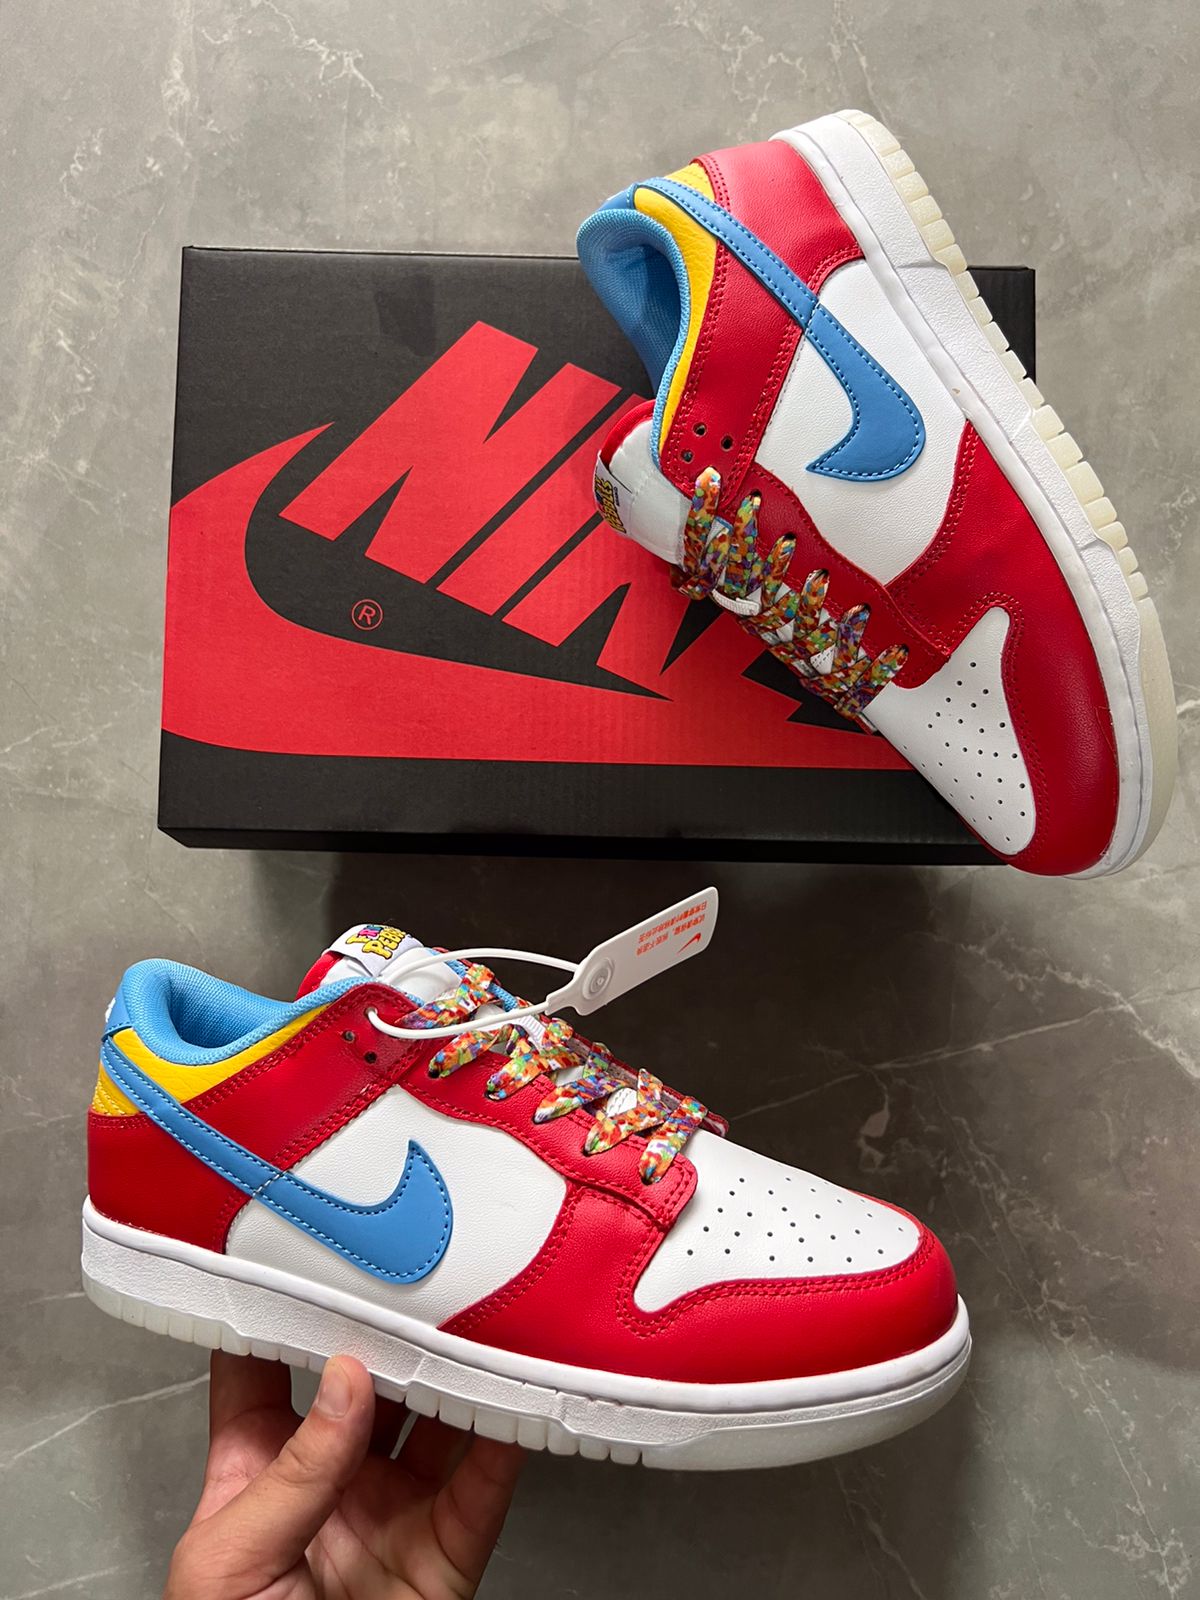 SB Dunk Lebron James Sneakers For Boys